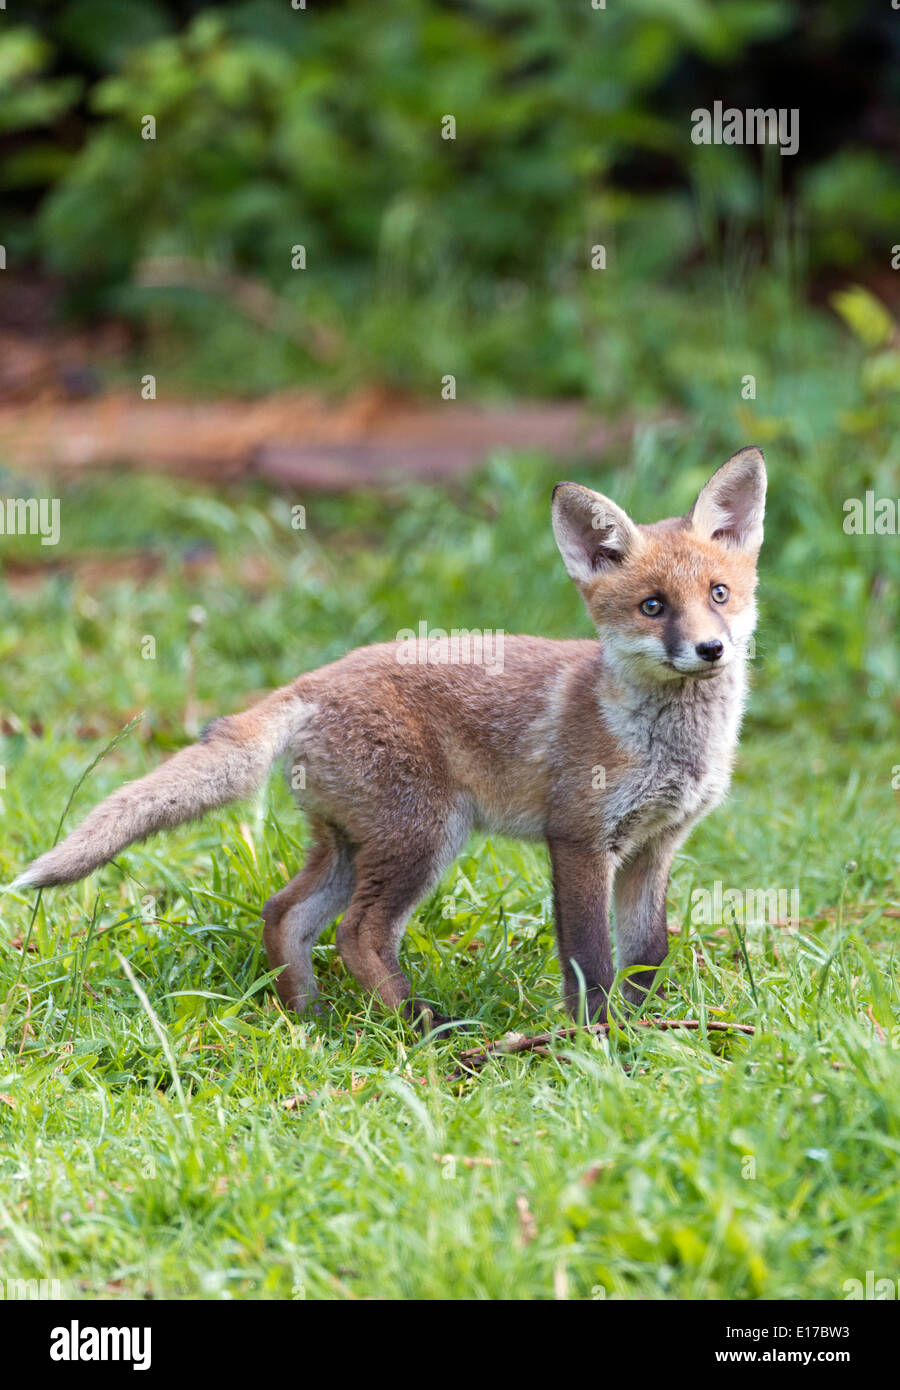 Fox and cub in garden duding summertime with long grass, alert and cuteness overload Stock Photo